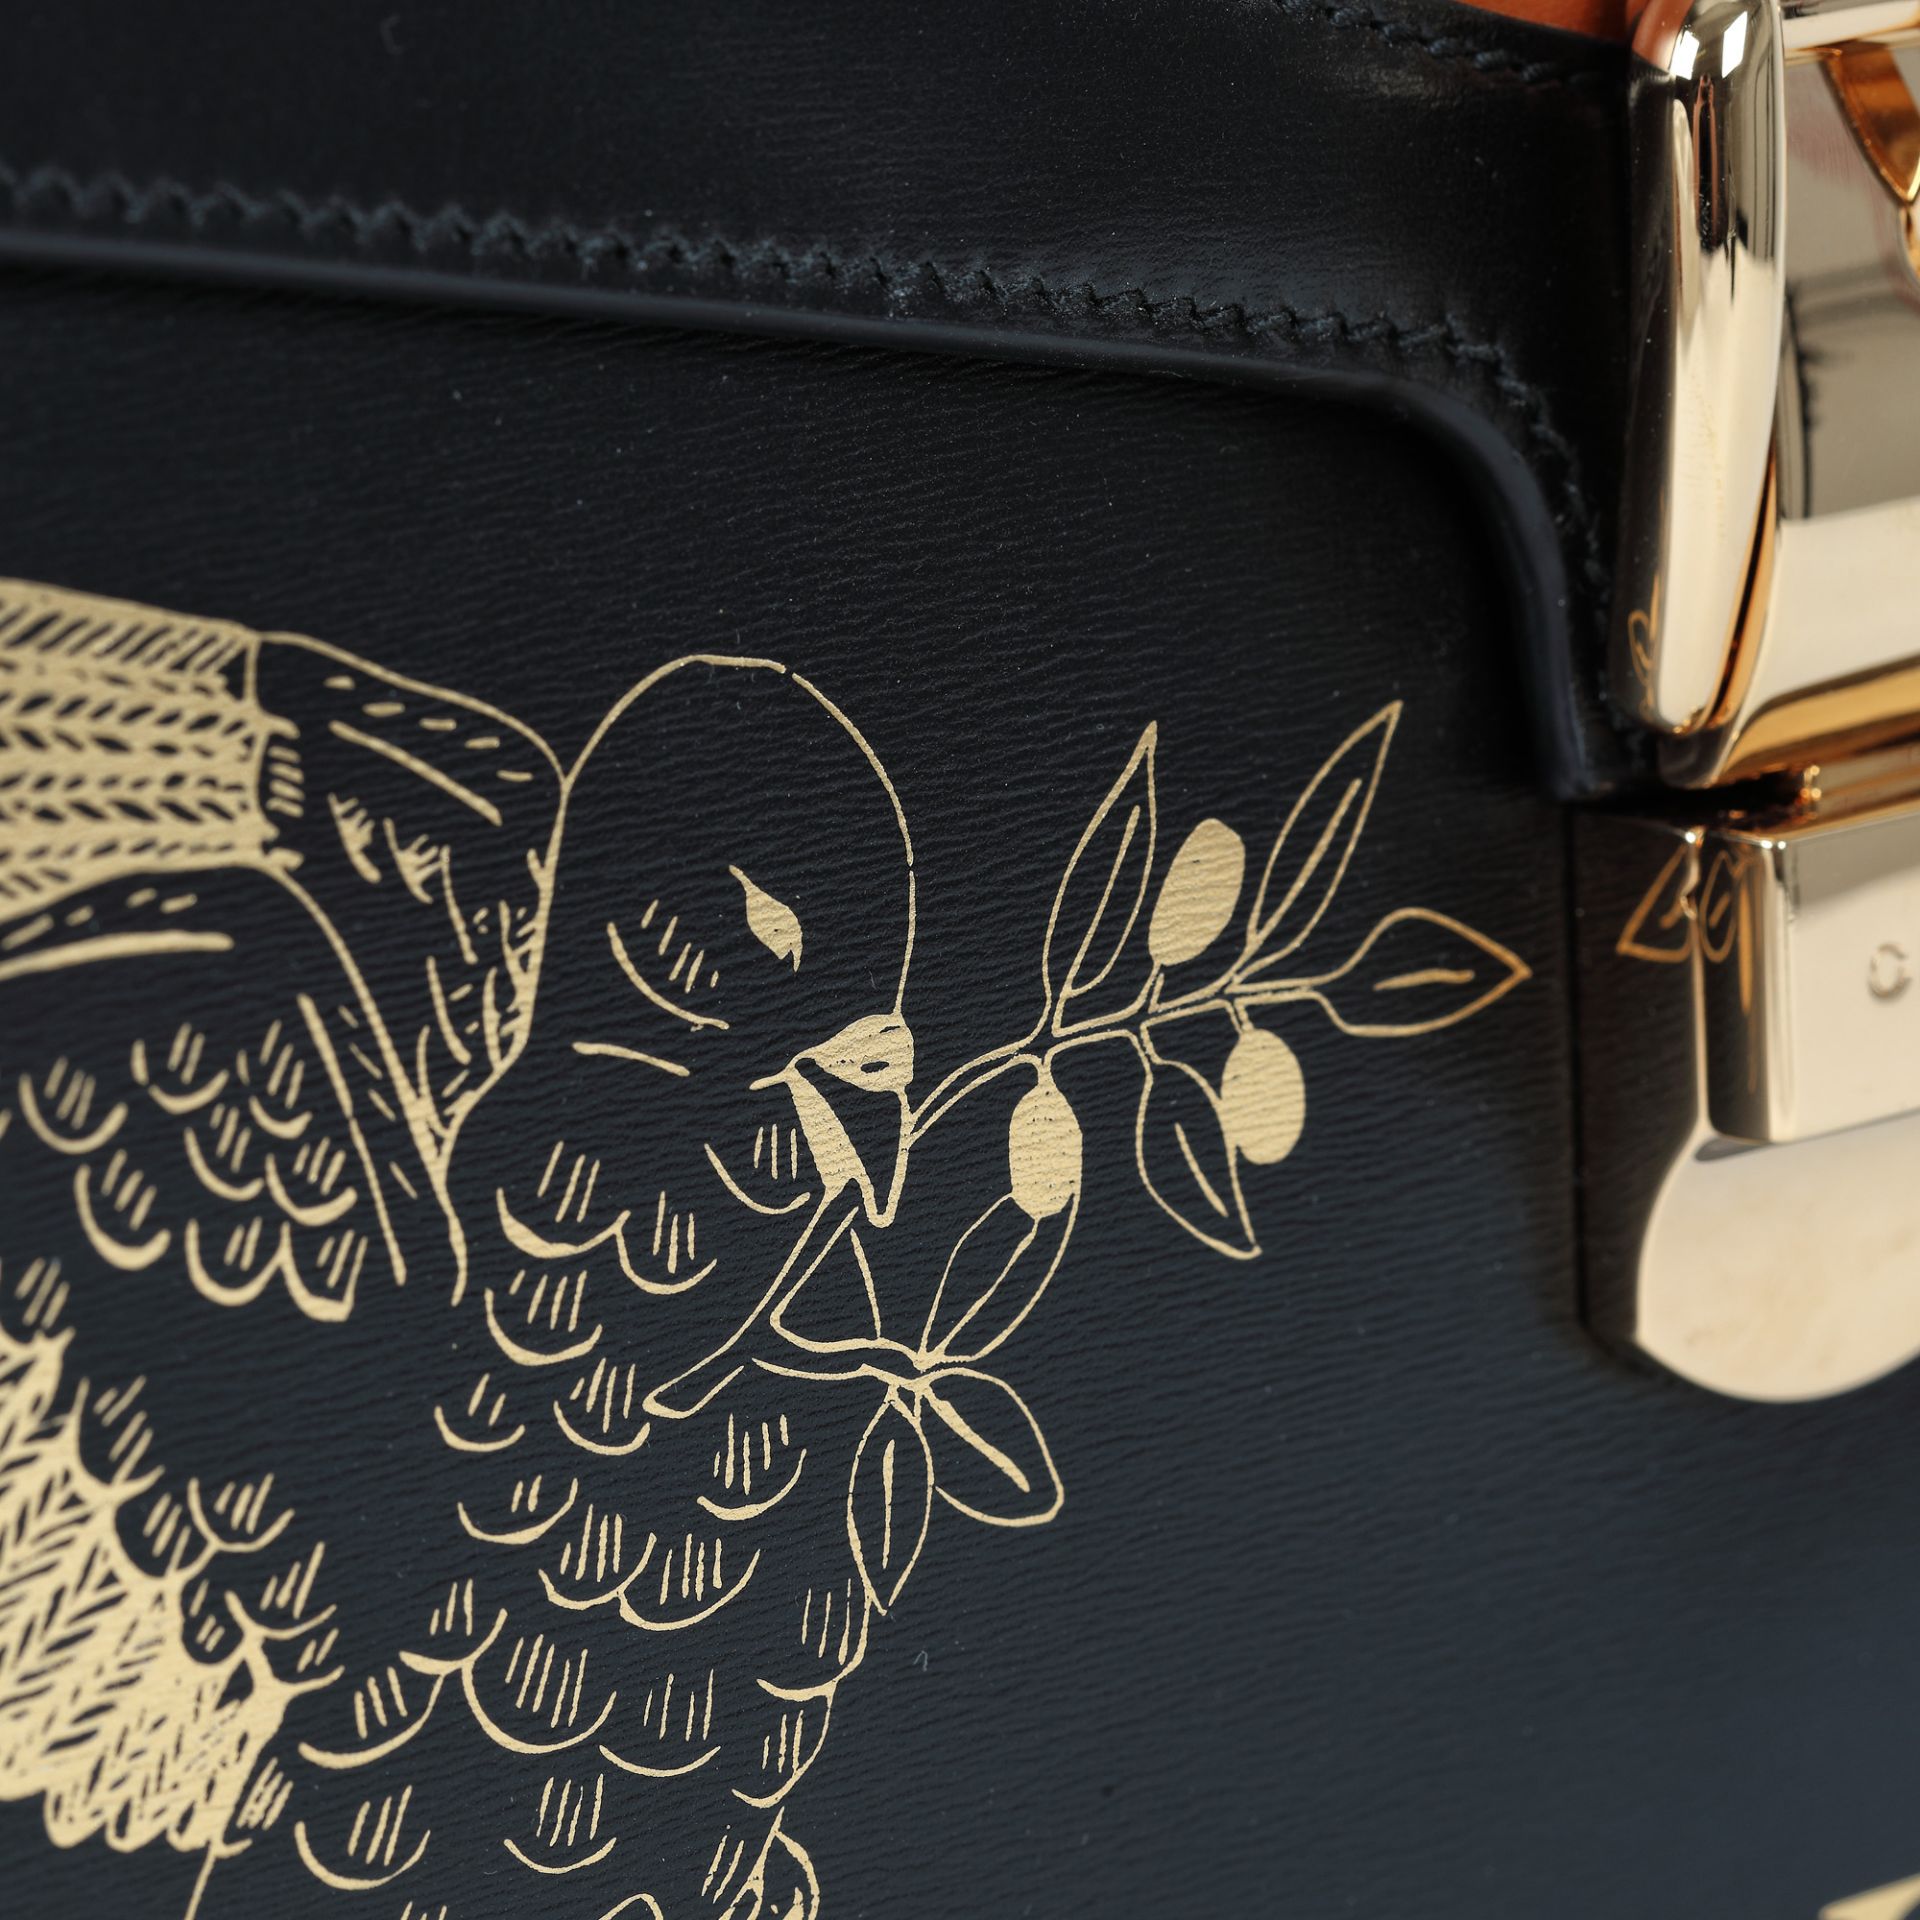 "Sylvie" - Gucci bag, leather, black, with birds and insects print - Image 3 of 5